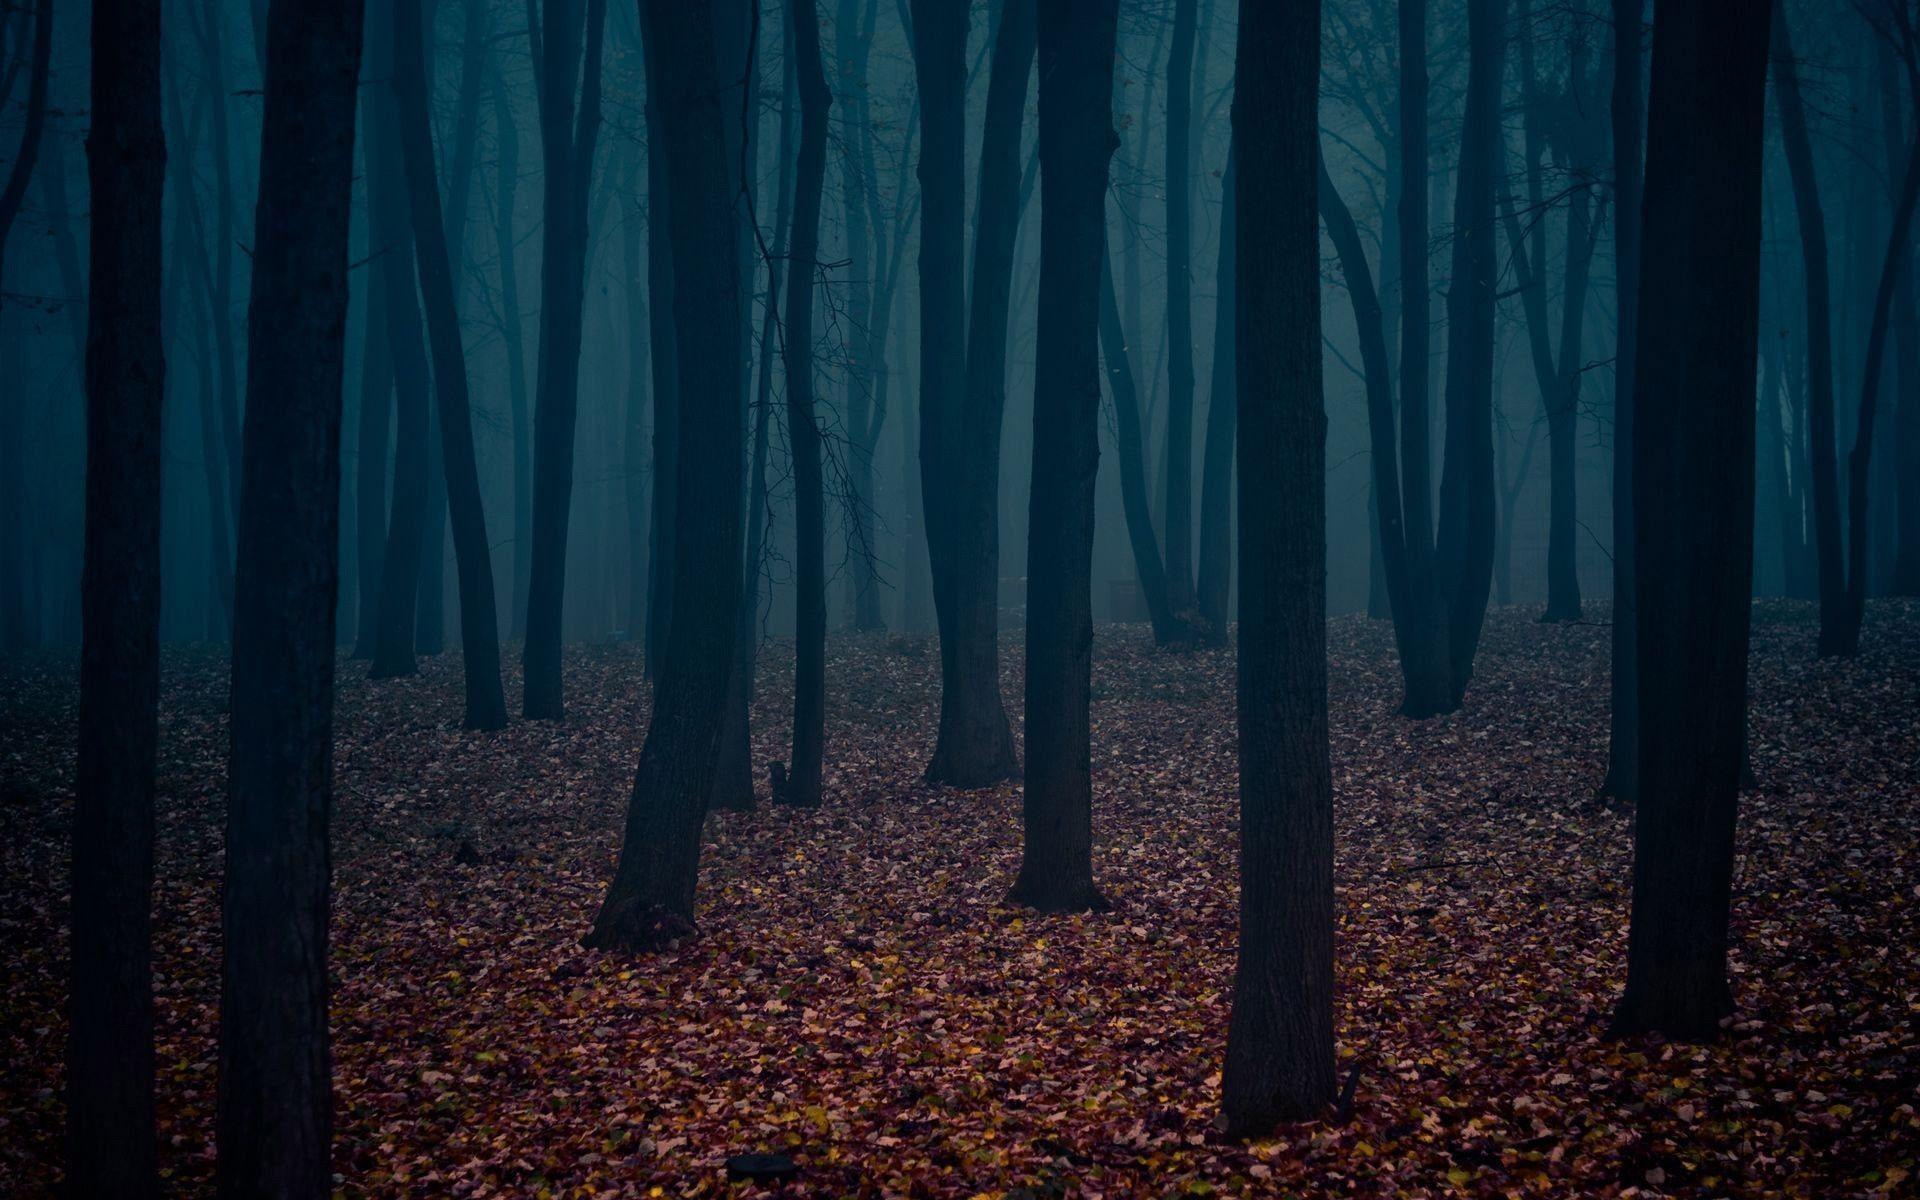 Aesthetic Forest Wallpaper Free .wallpaperaccess.com